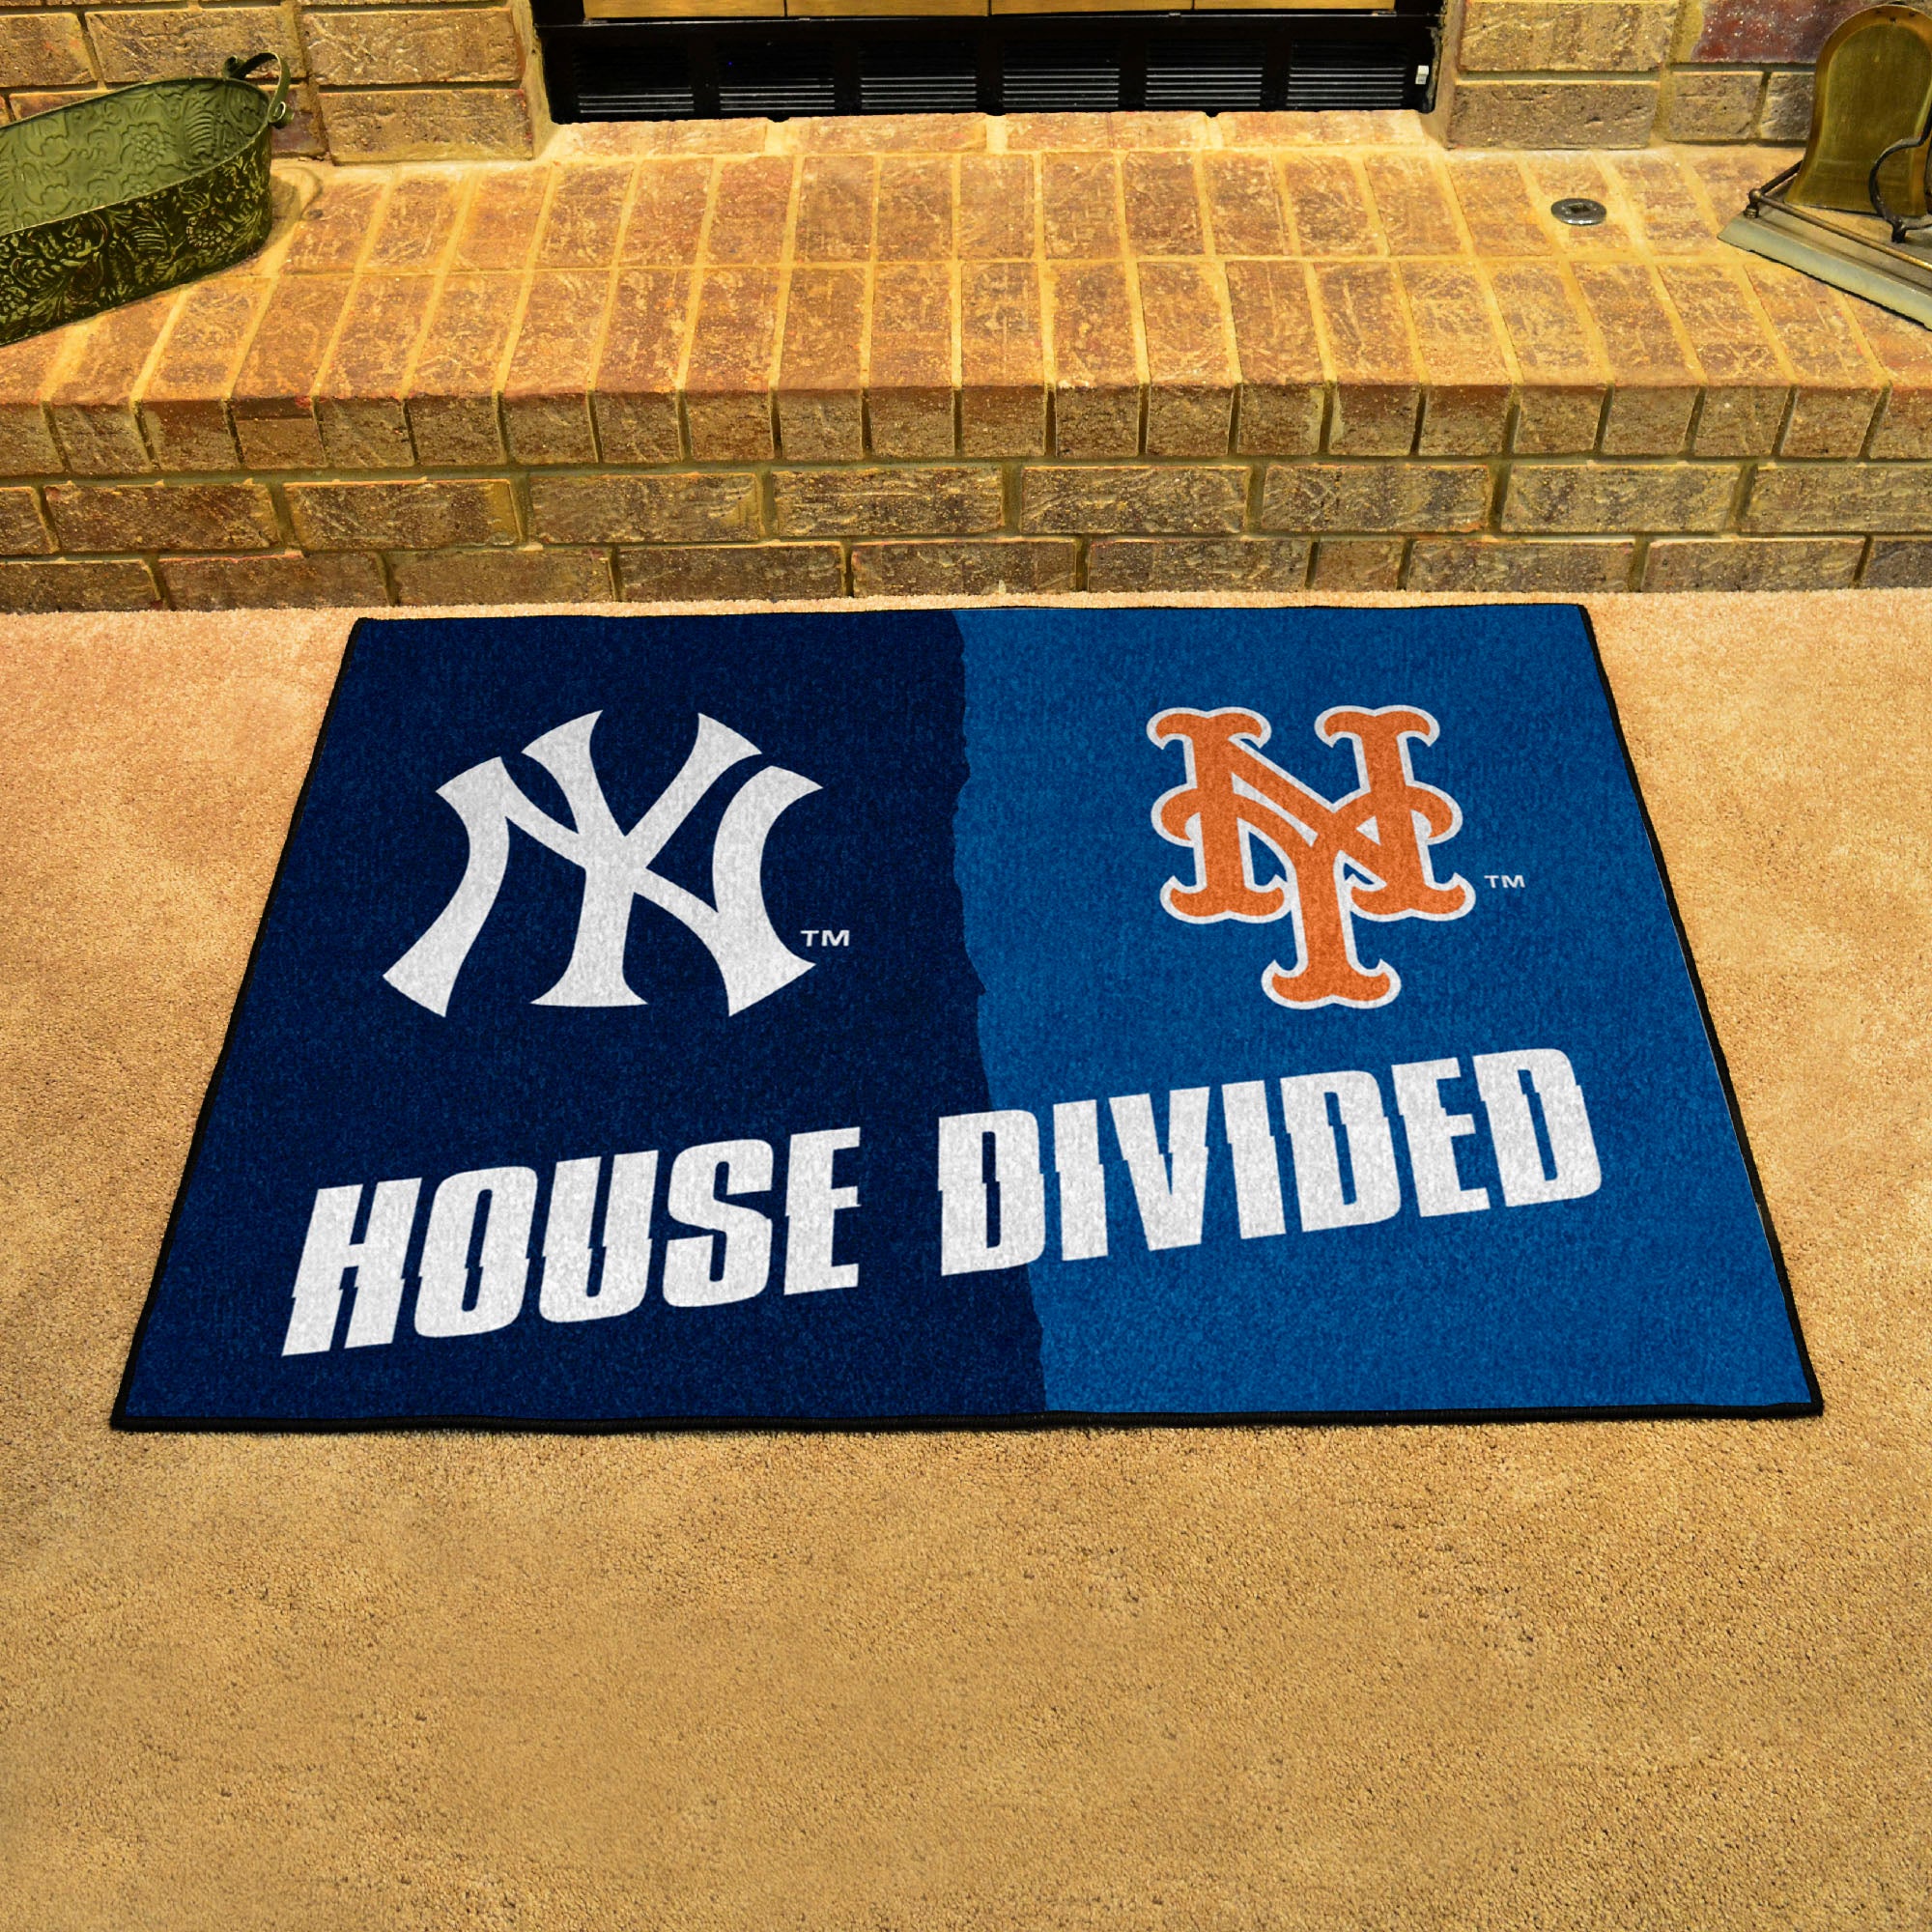 FANMATS, MLB House Divided - Yankees / Mets House Divided Rug